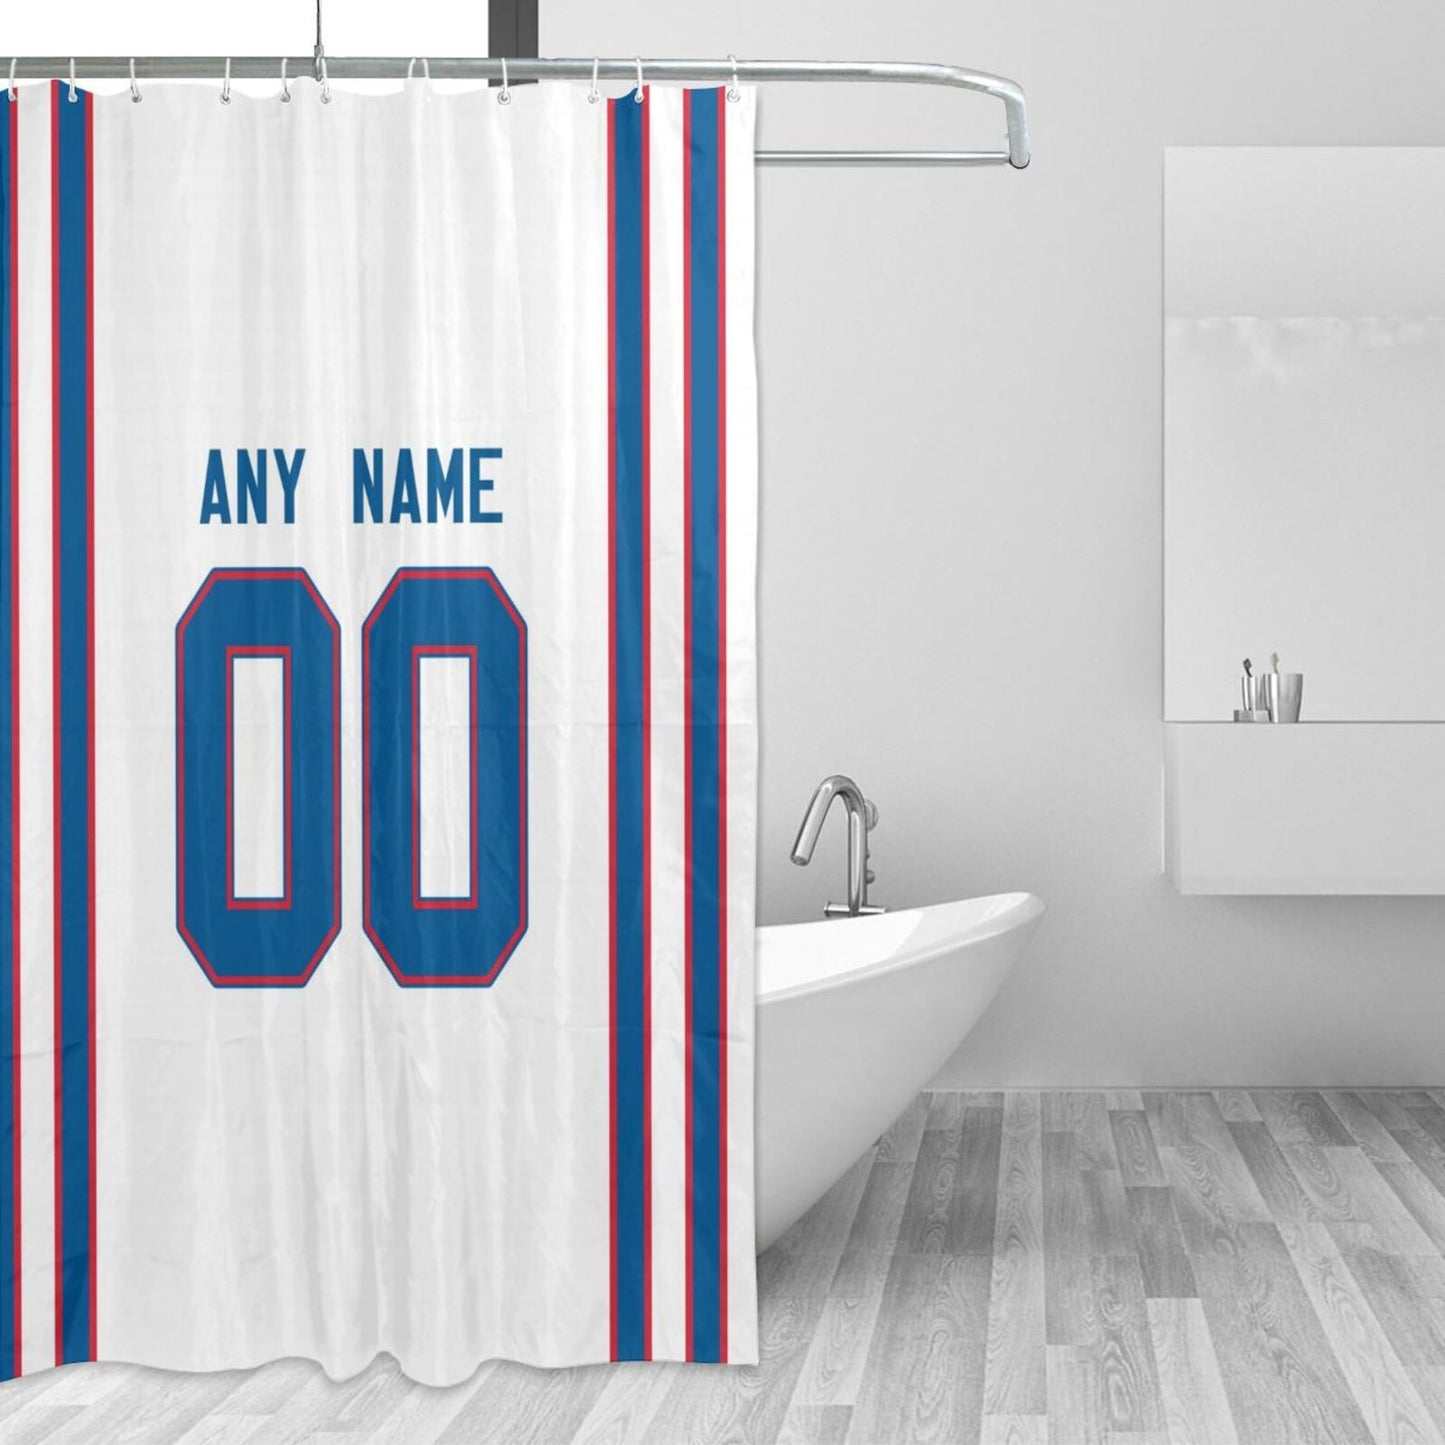 Custom Football Buffalo Bills style personalized shower curtain custom design name and number set of 12 shower curtain hooks Rings